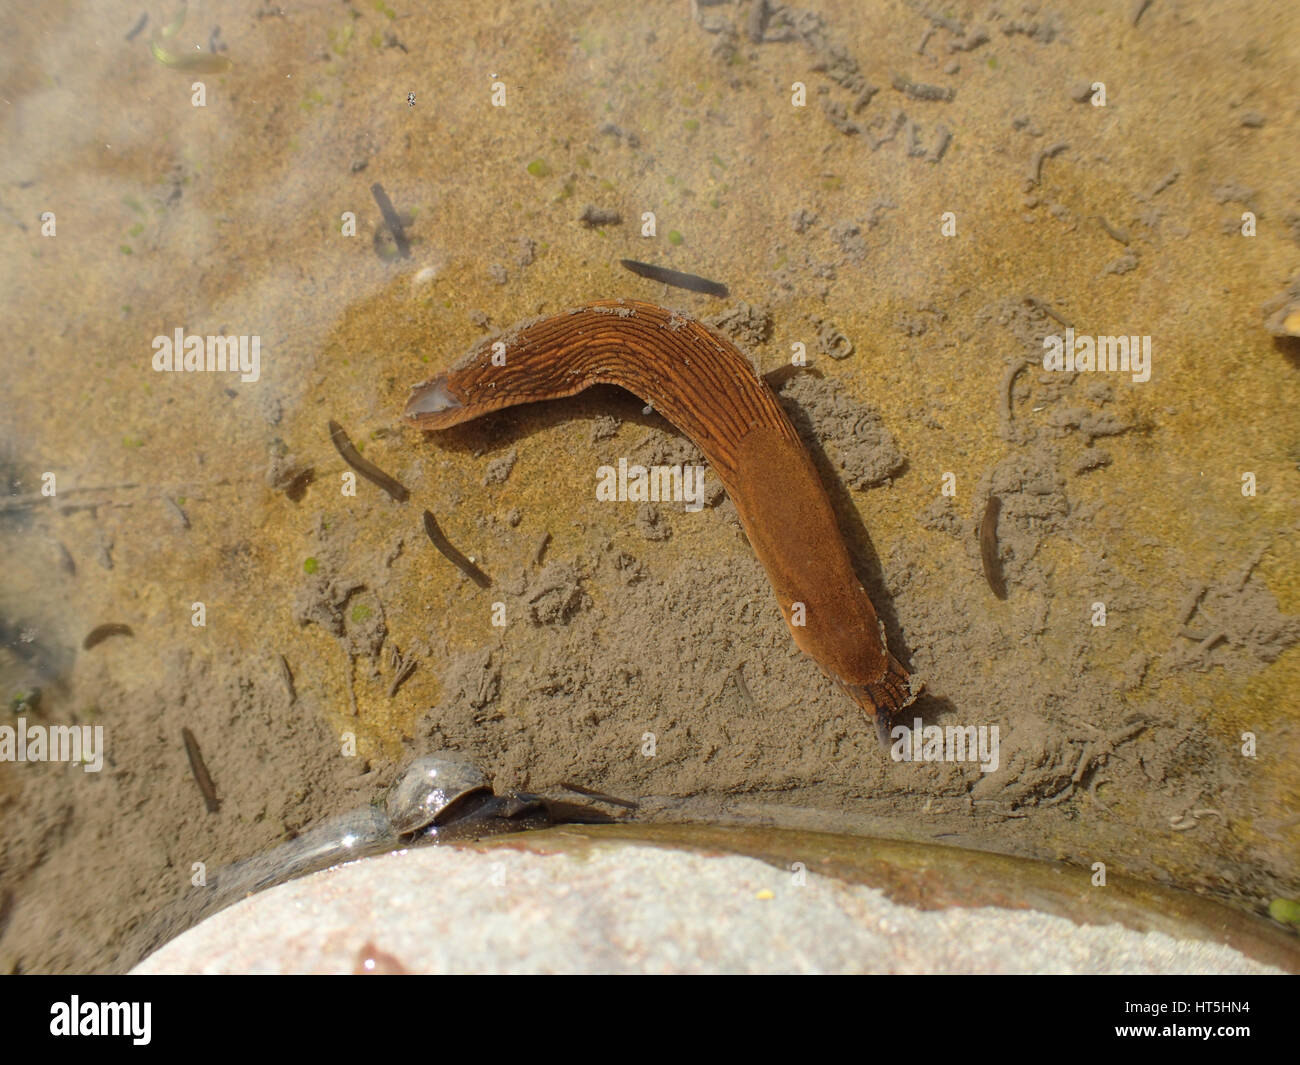 Spanish slug (Arion vulgaris) underwater and surrounded by flatworms (Polycelis nigra or Polycelis tenuis) on a sandstone rock in a garden pond Stock Photo